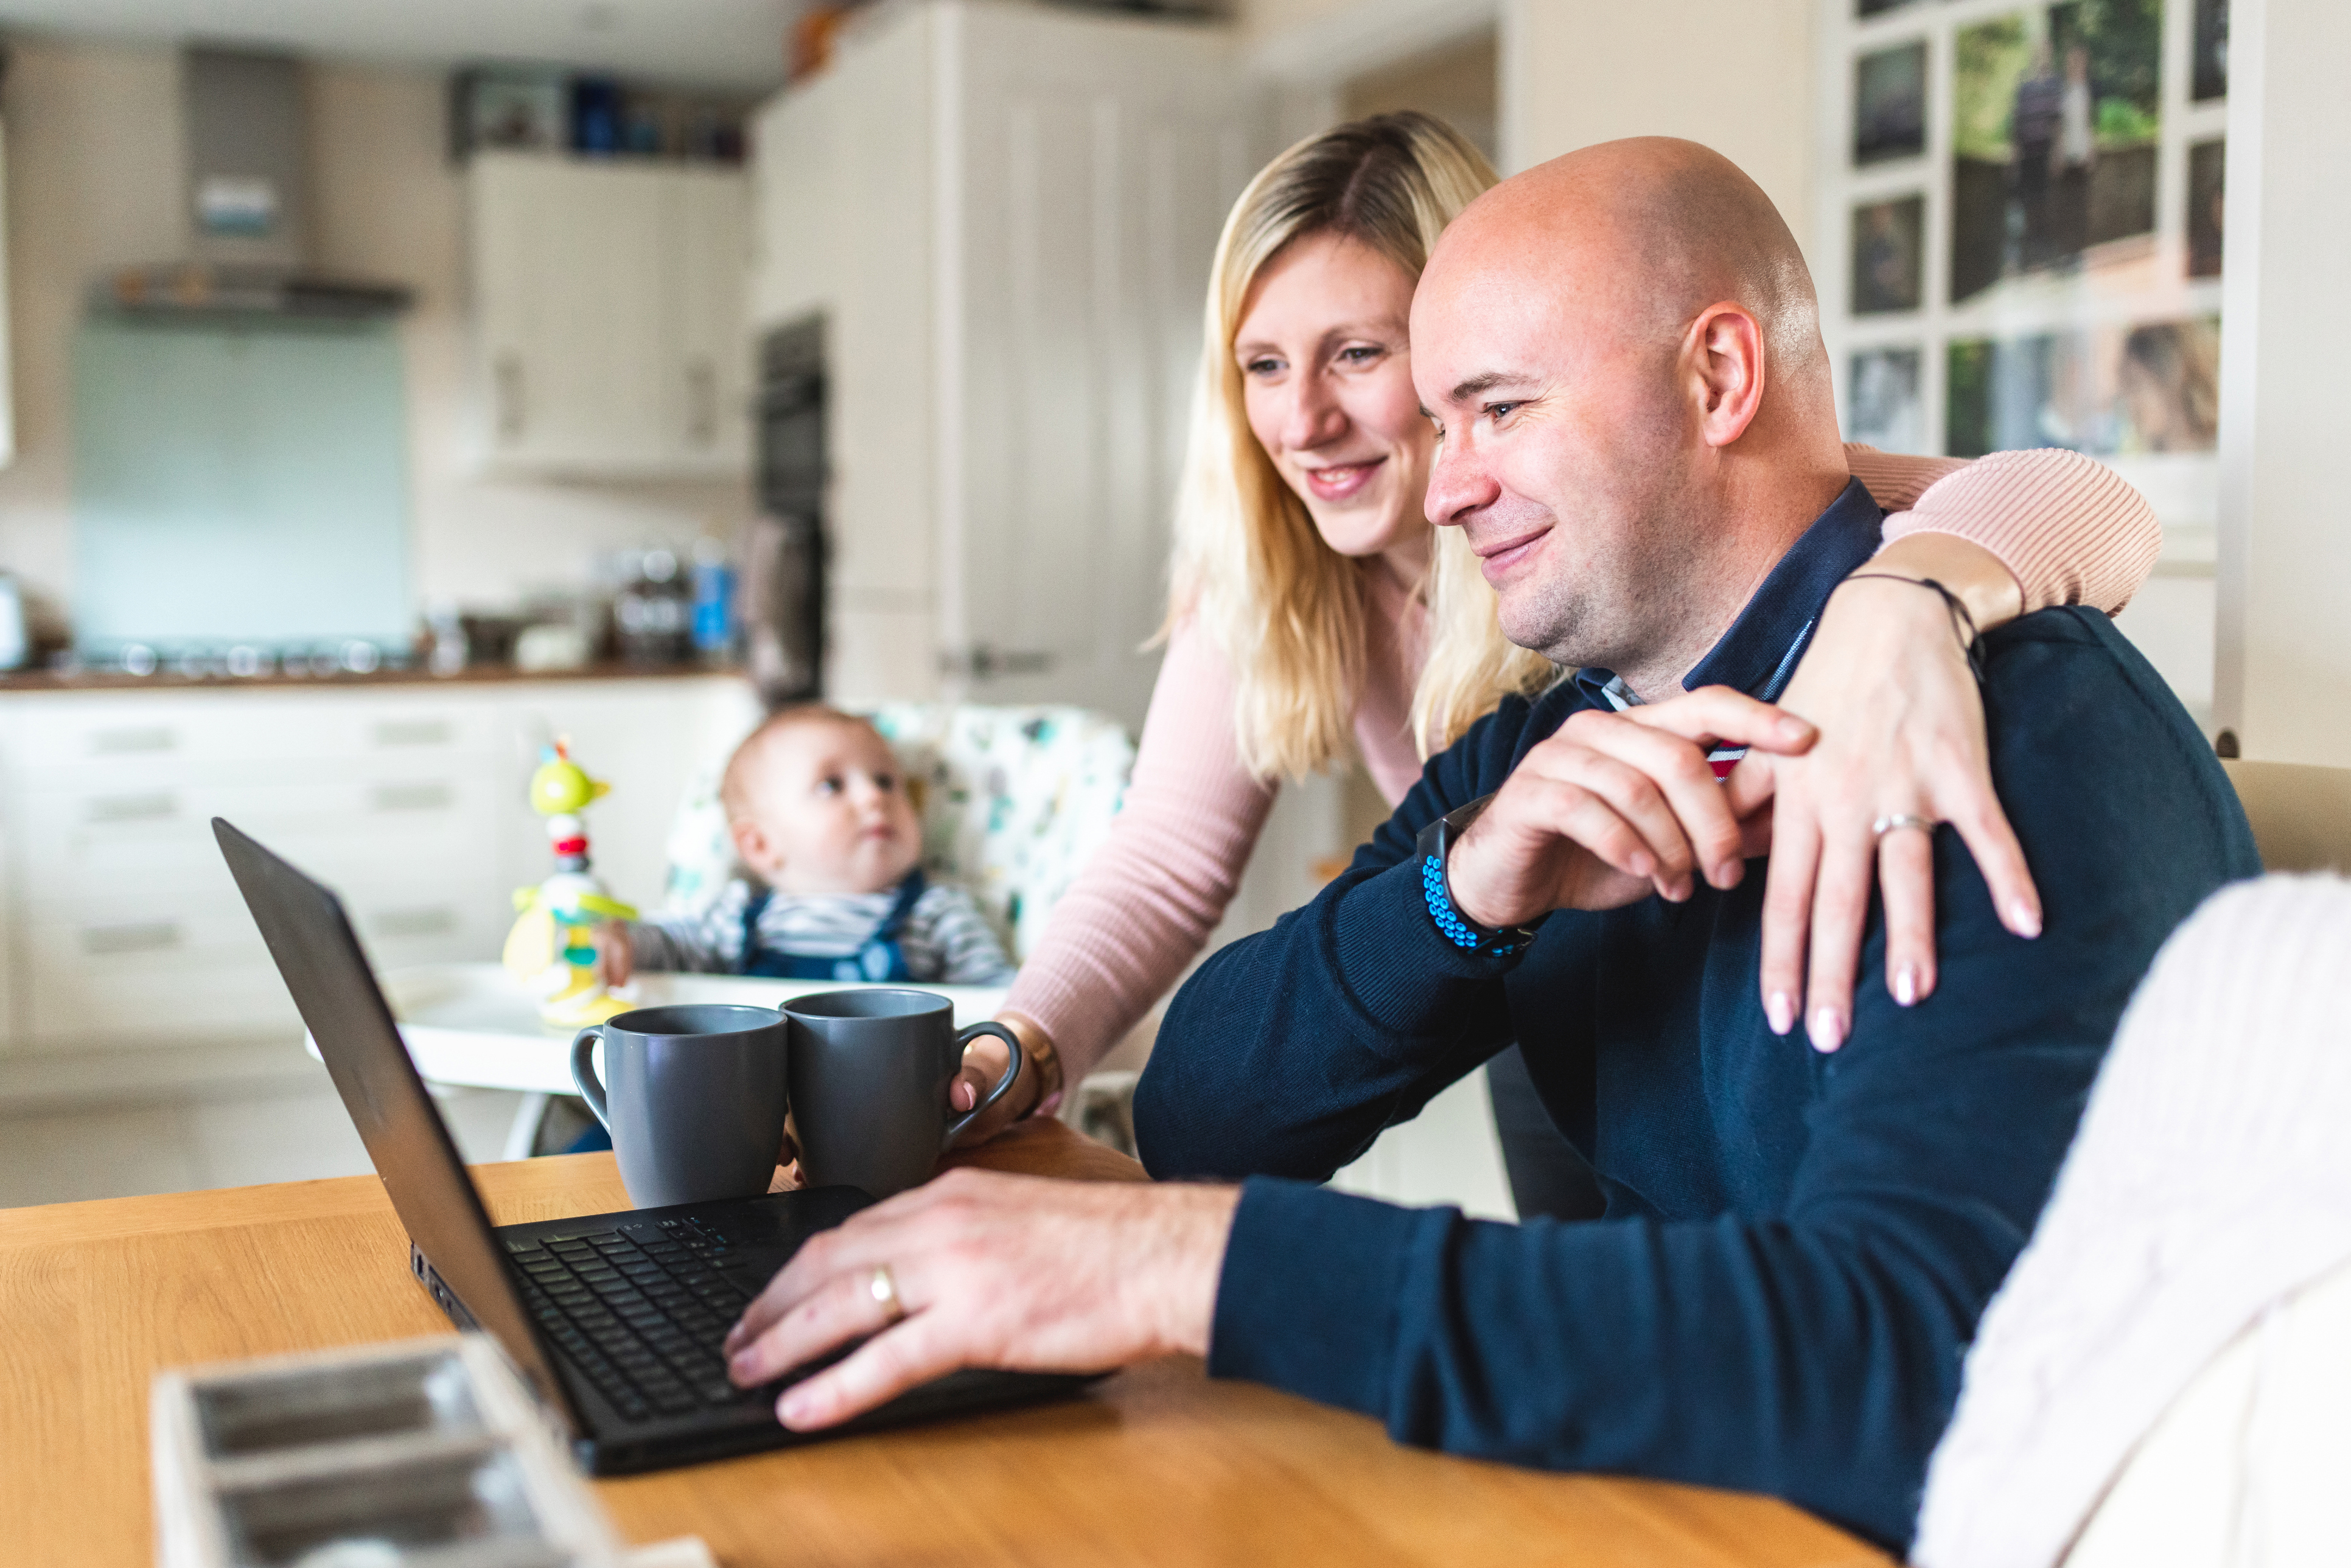 Mother and father looking at laptop on kitchen table, baby in high-chair in the background